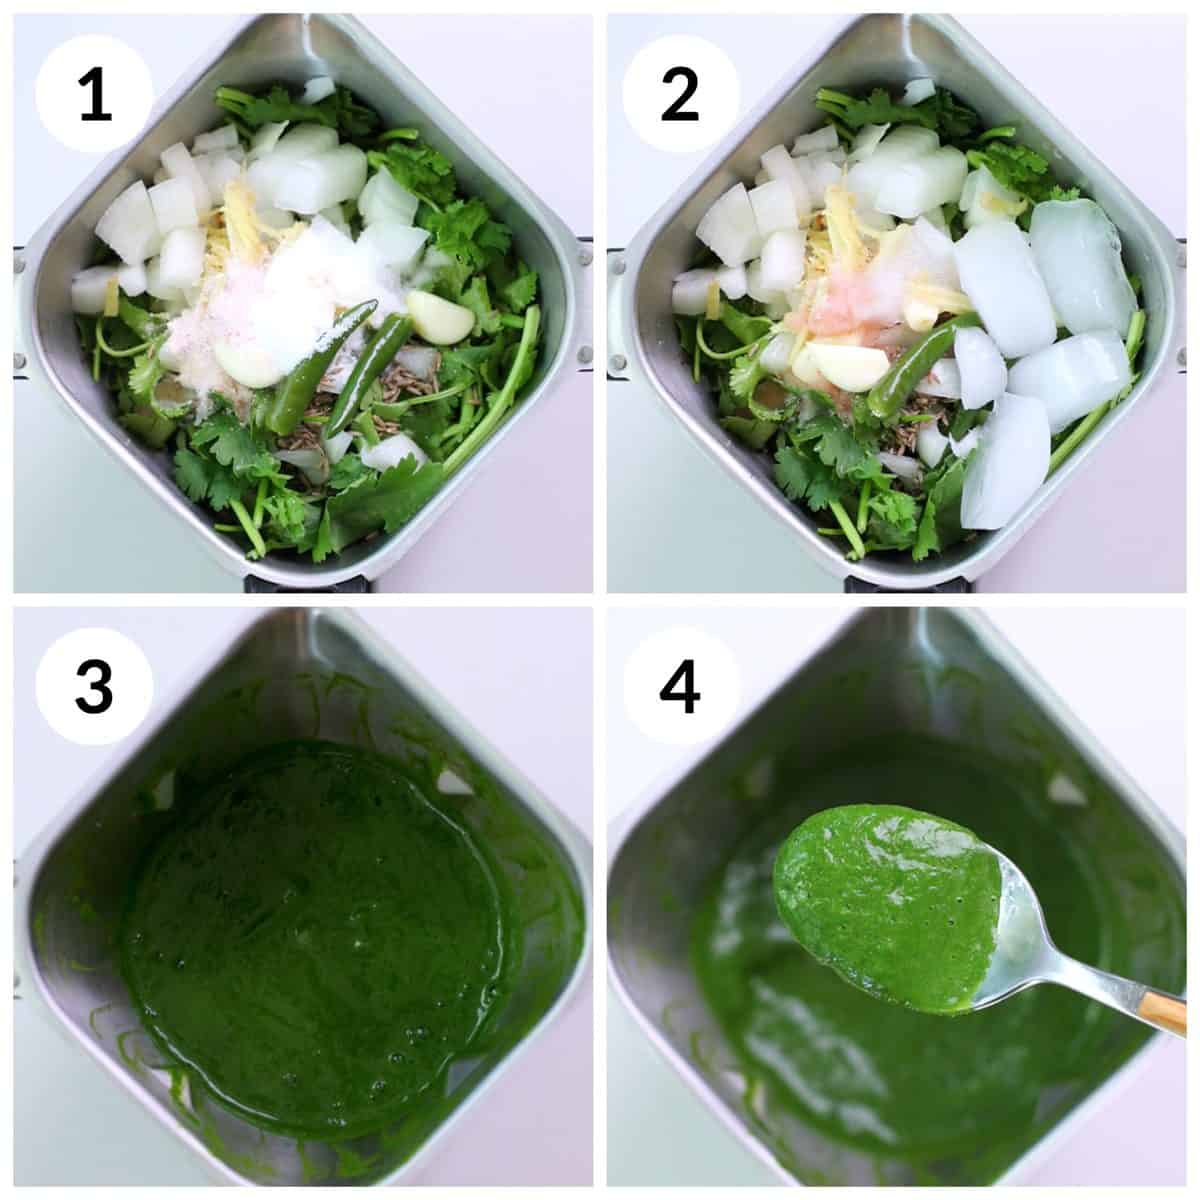 Step wise pics for how to make cilantro mint chutney in a blender